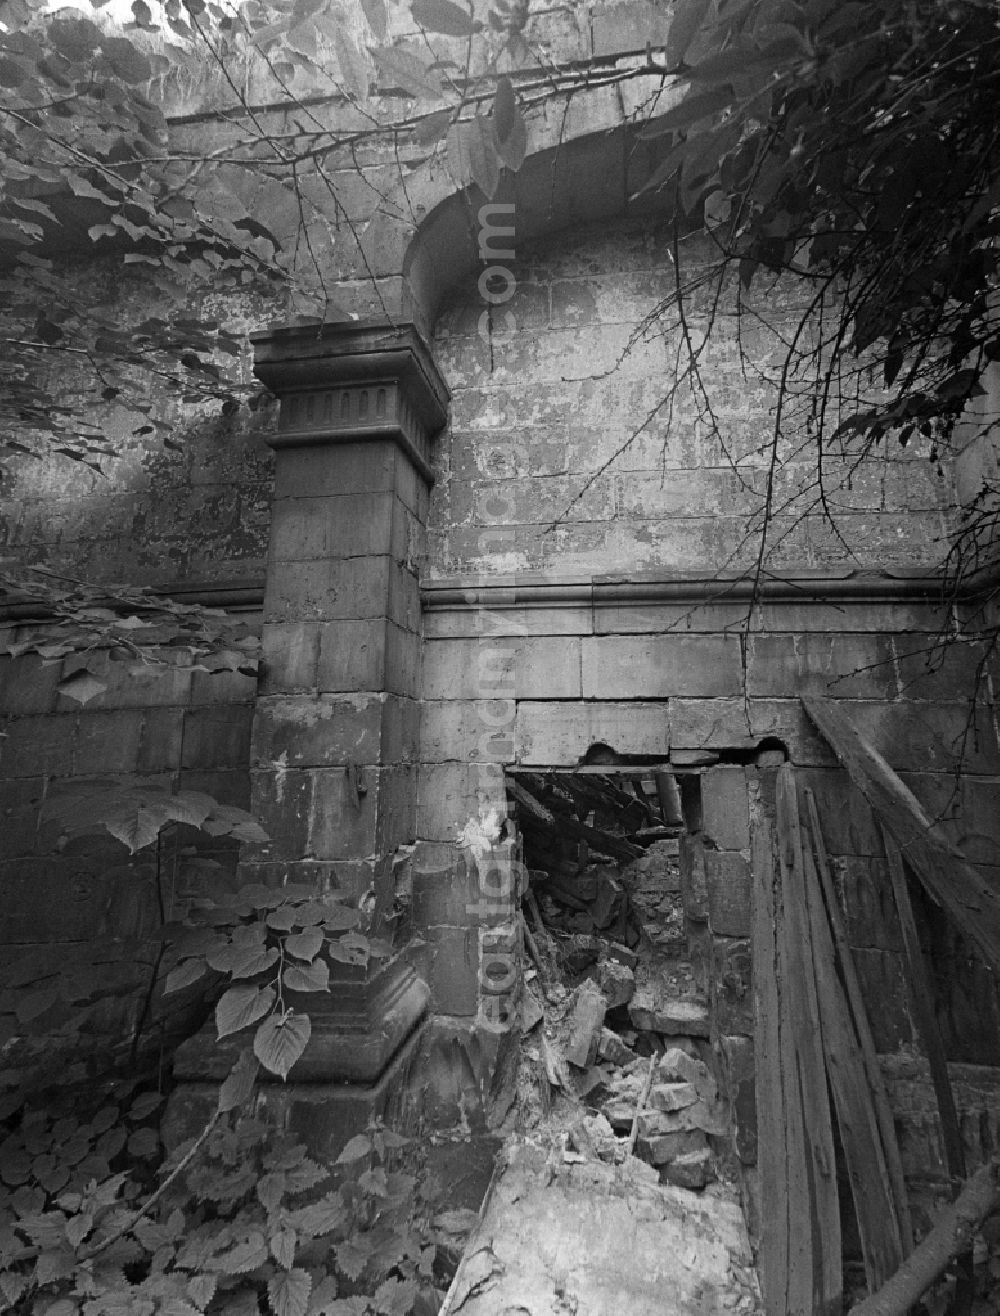 GDR photo archive: Halberstadt - Debris and wall remains of the ruins of the synagogue on Bakenstrasse and Judenstrasse in Halberstadt in the state Saxony-Anhalt on the territory of the former GDR, German Democratic Republic